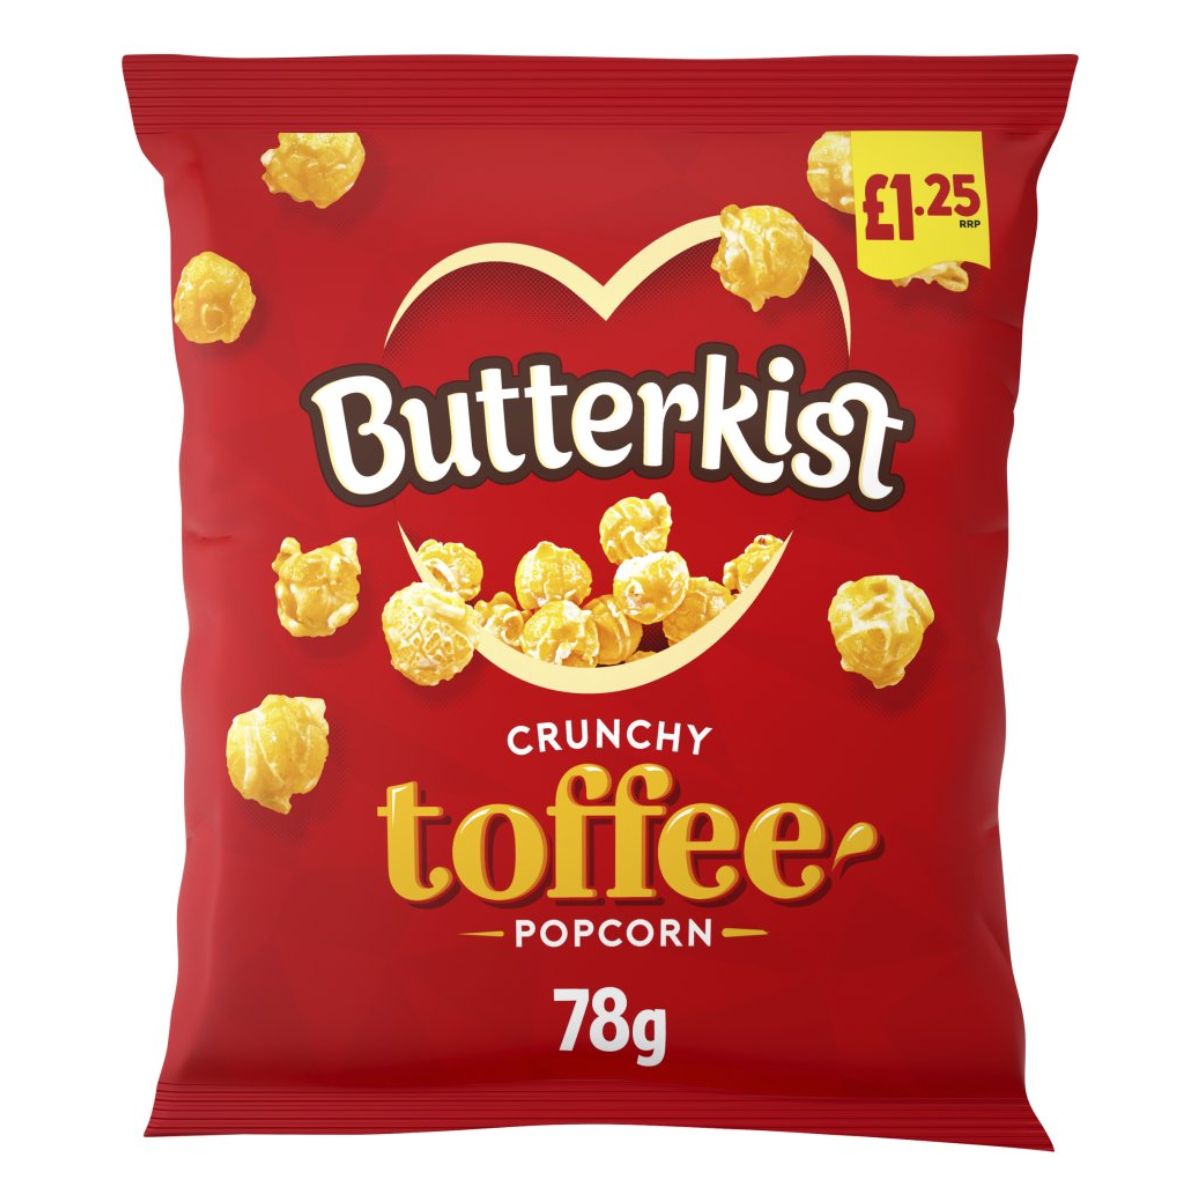 Butterkist - Crunchy Toffee Popcorn - 78g is the product.